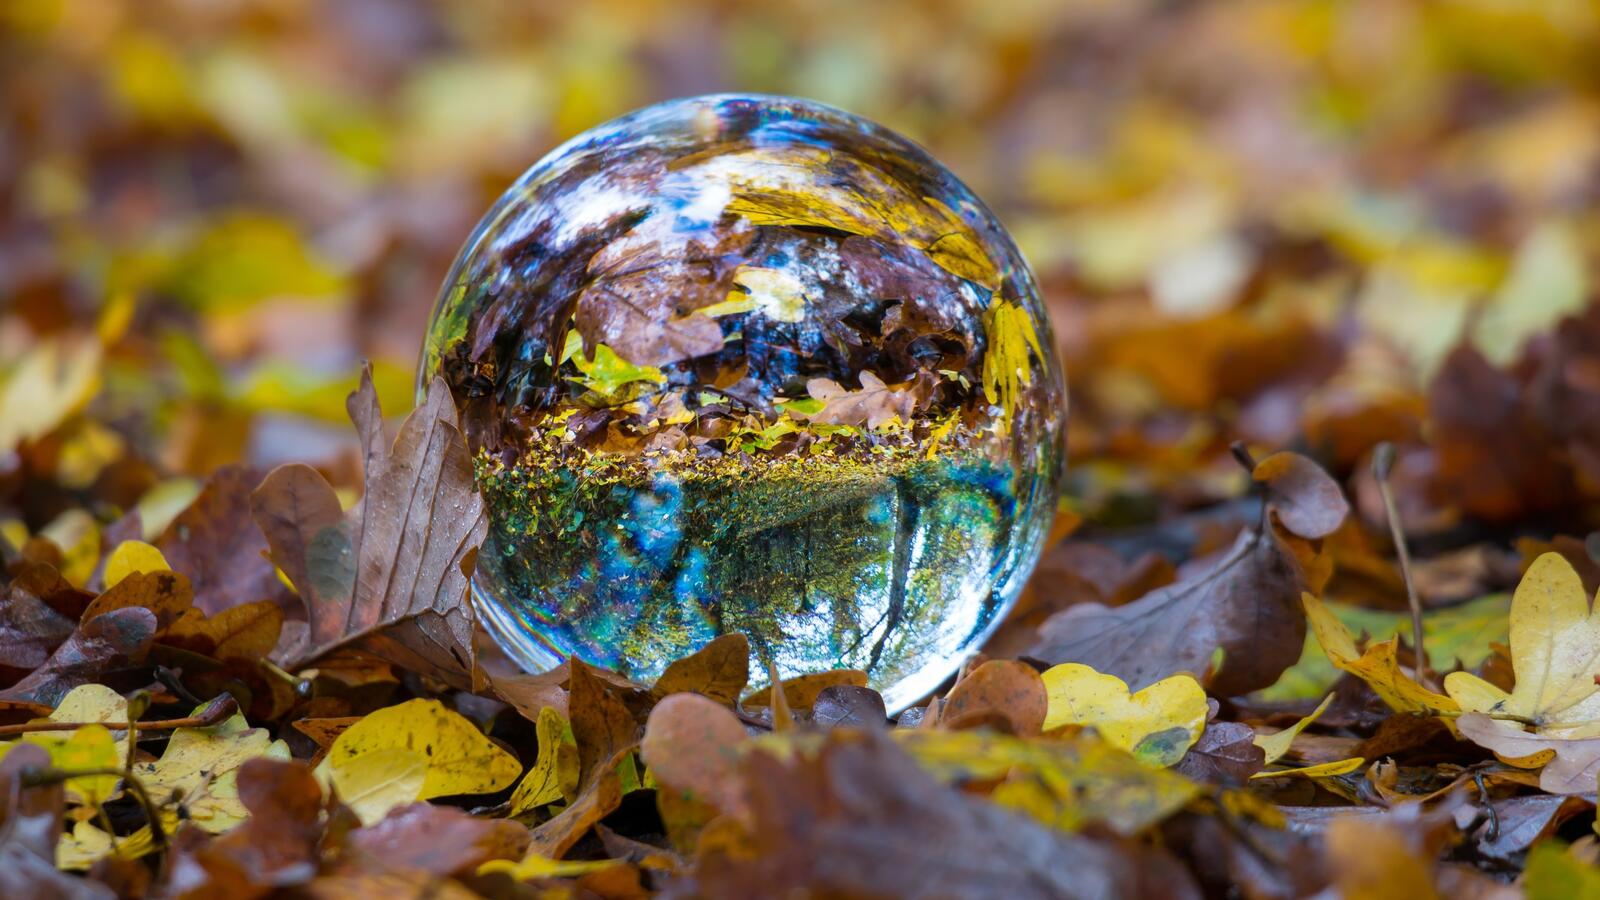 Free photo A transparent glass ball lies in the fallen leaves